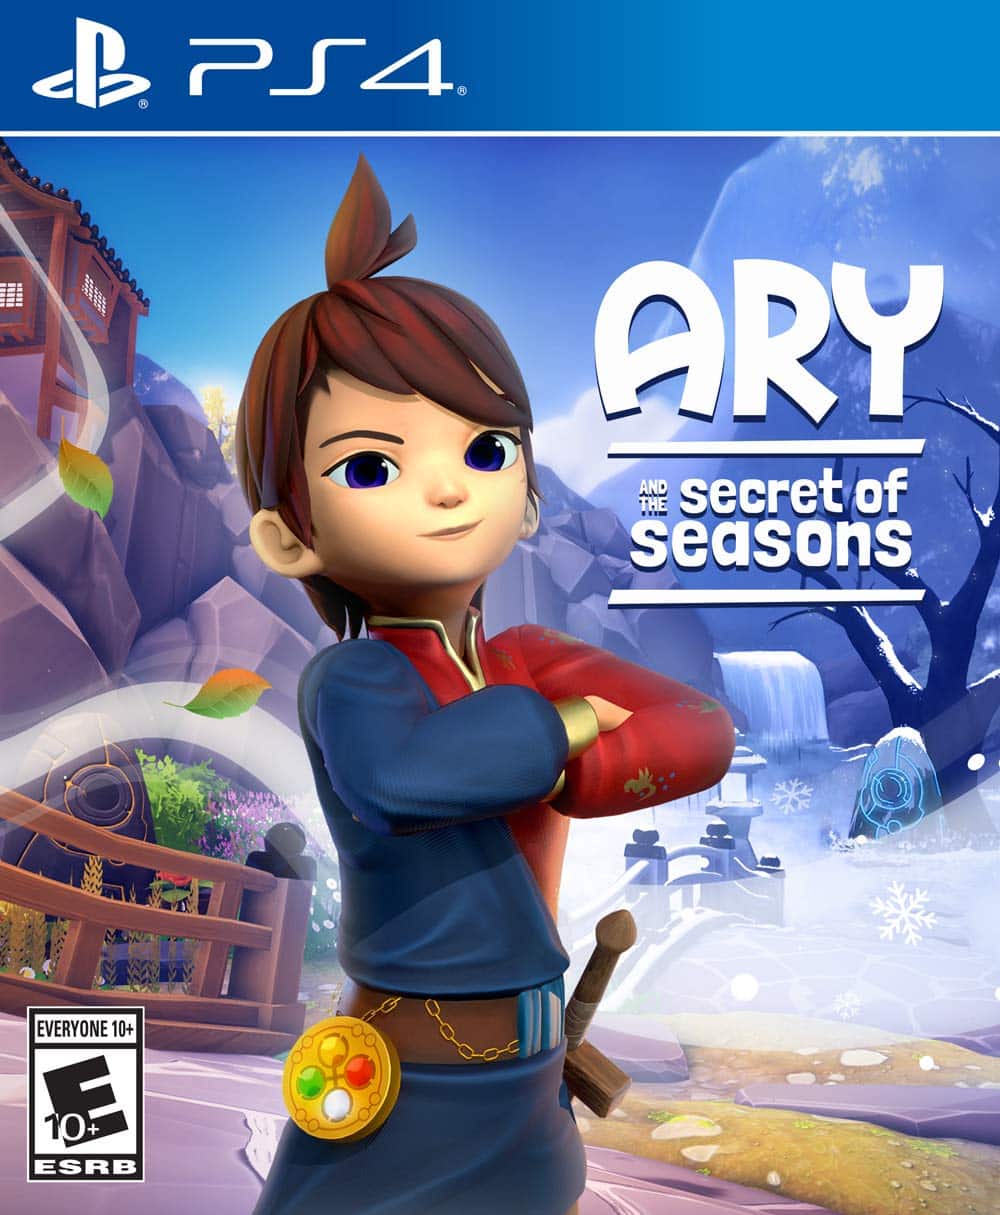 Ary and the Secret of Seasons player count stats